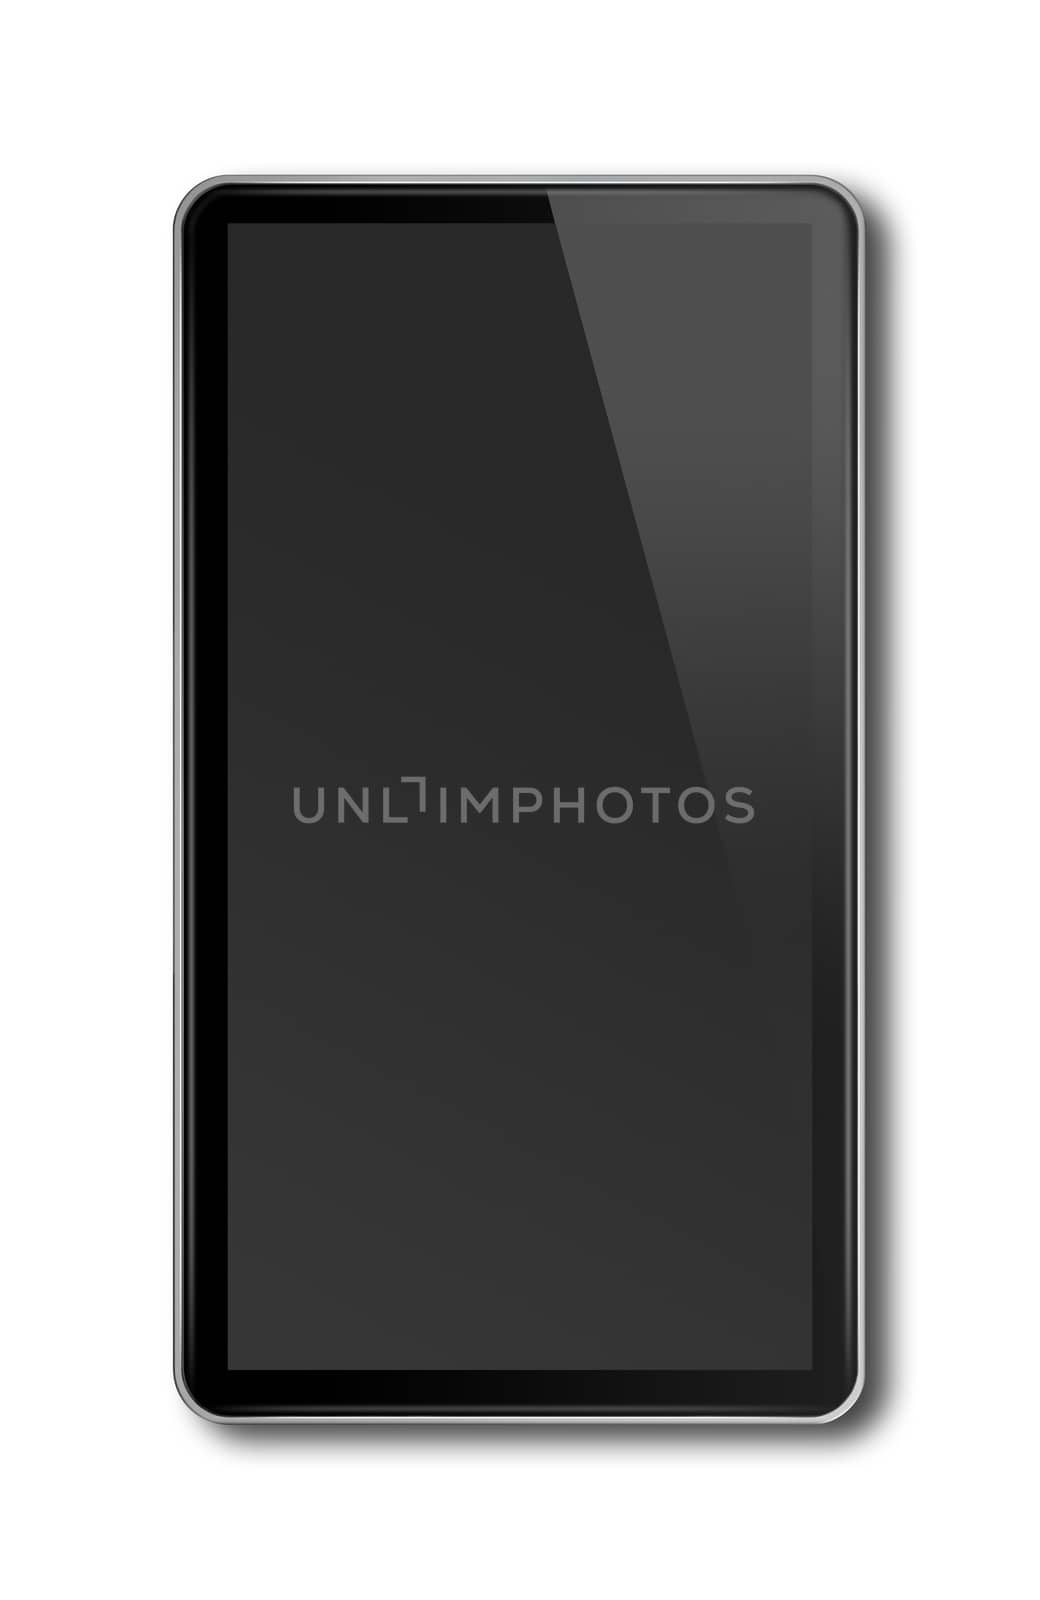 Black smartphone, digital tablet pc template isolated on white by daboost